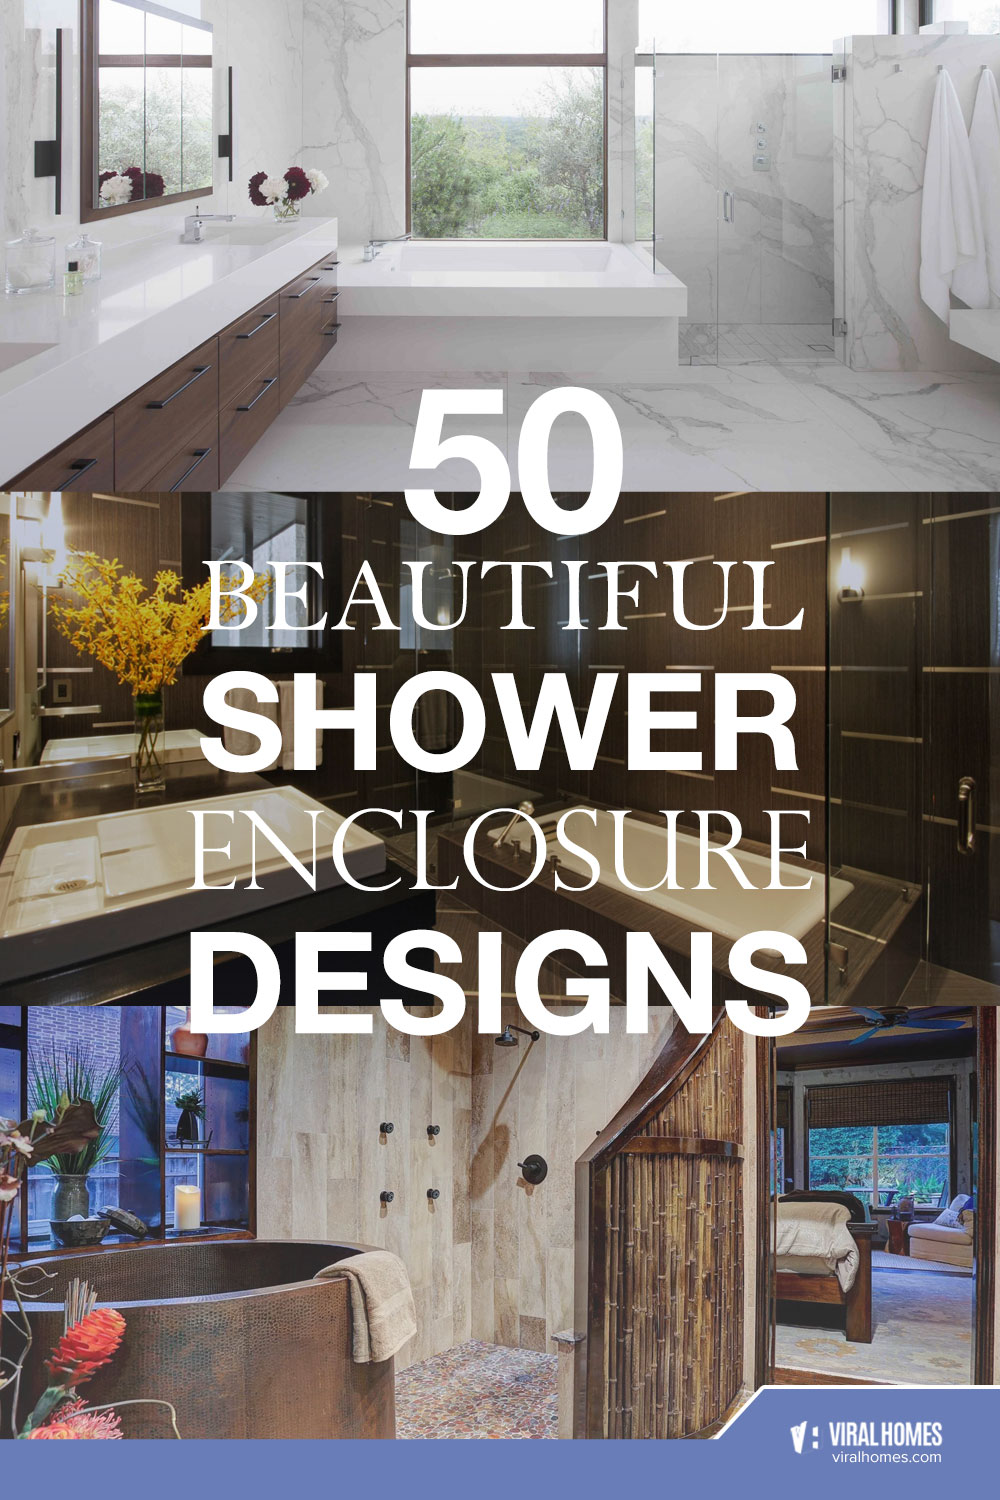 Beautiful Shower Enclosure Designs to Decorate your Bathroom